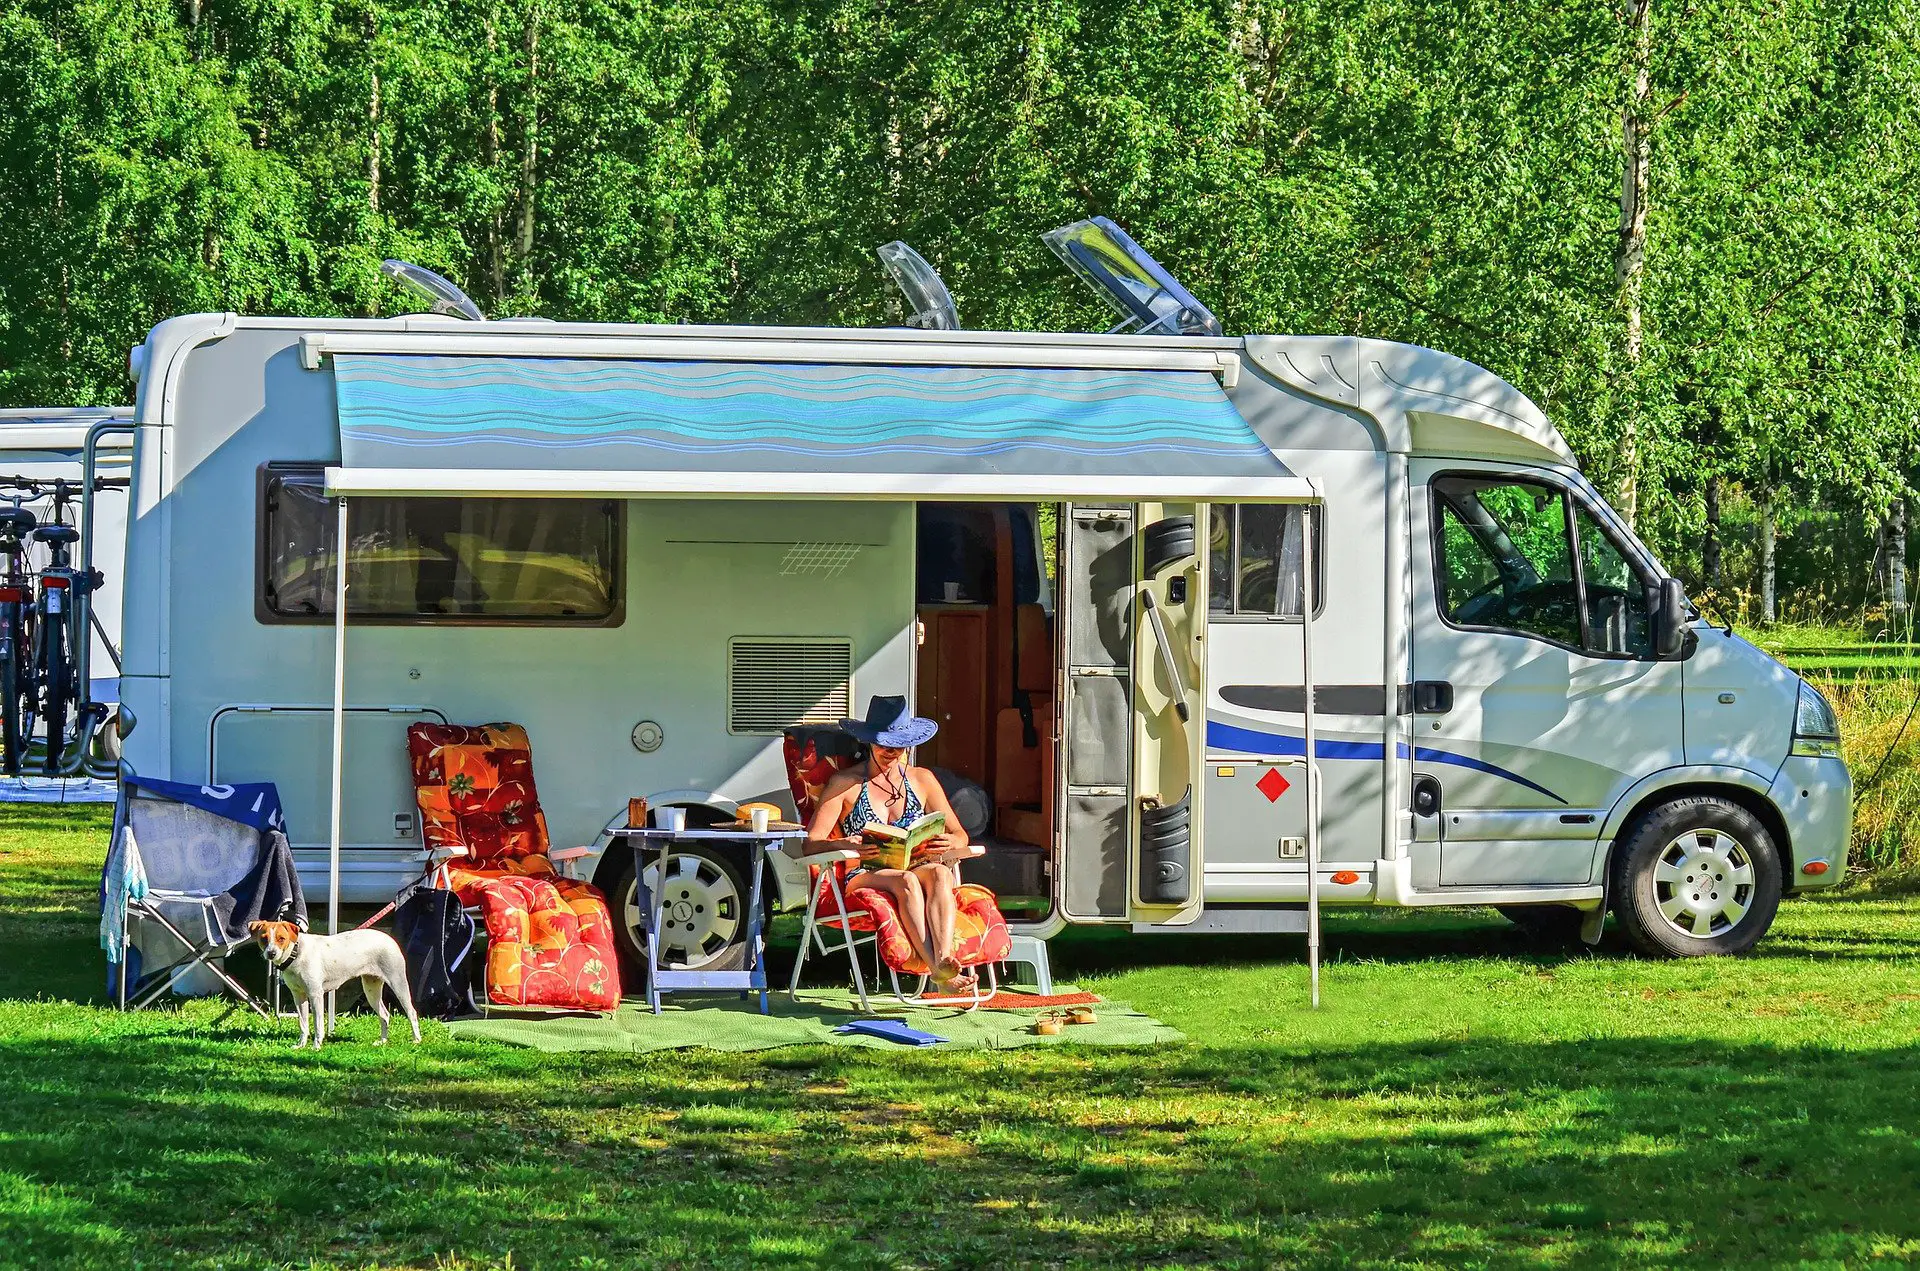 A lady lounging outside while camping at an RV campground